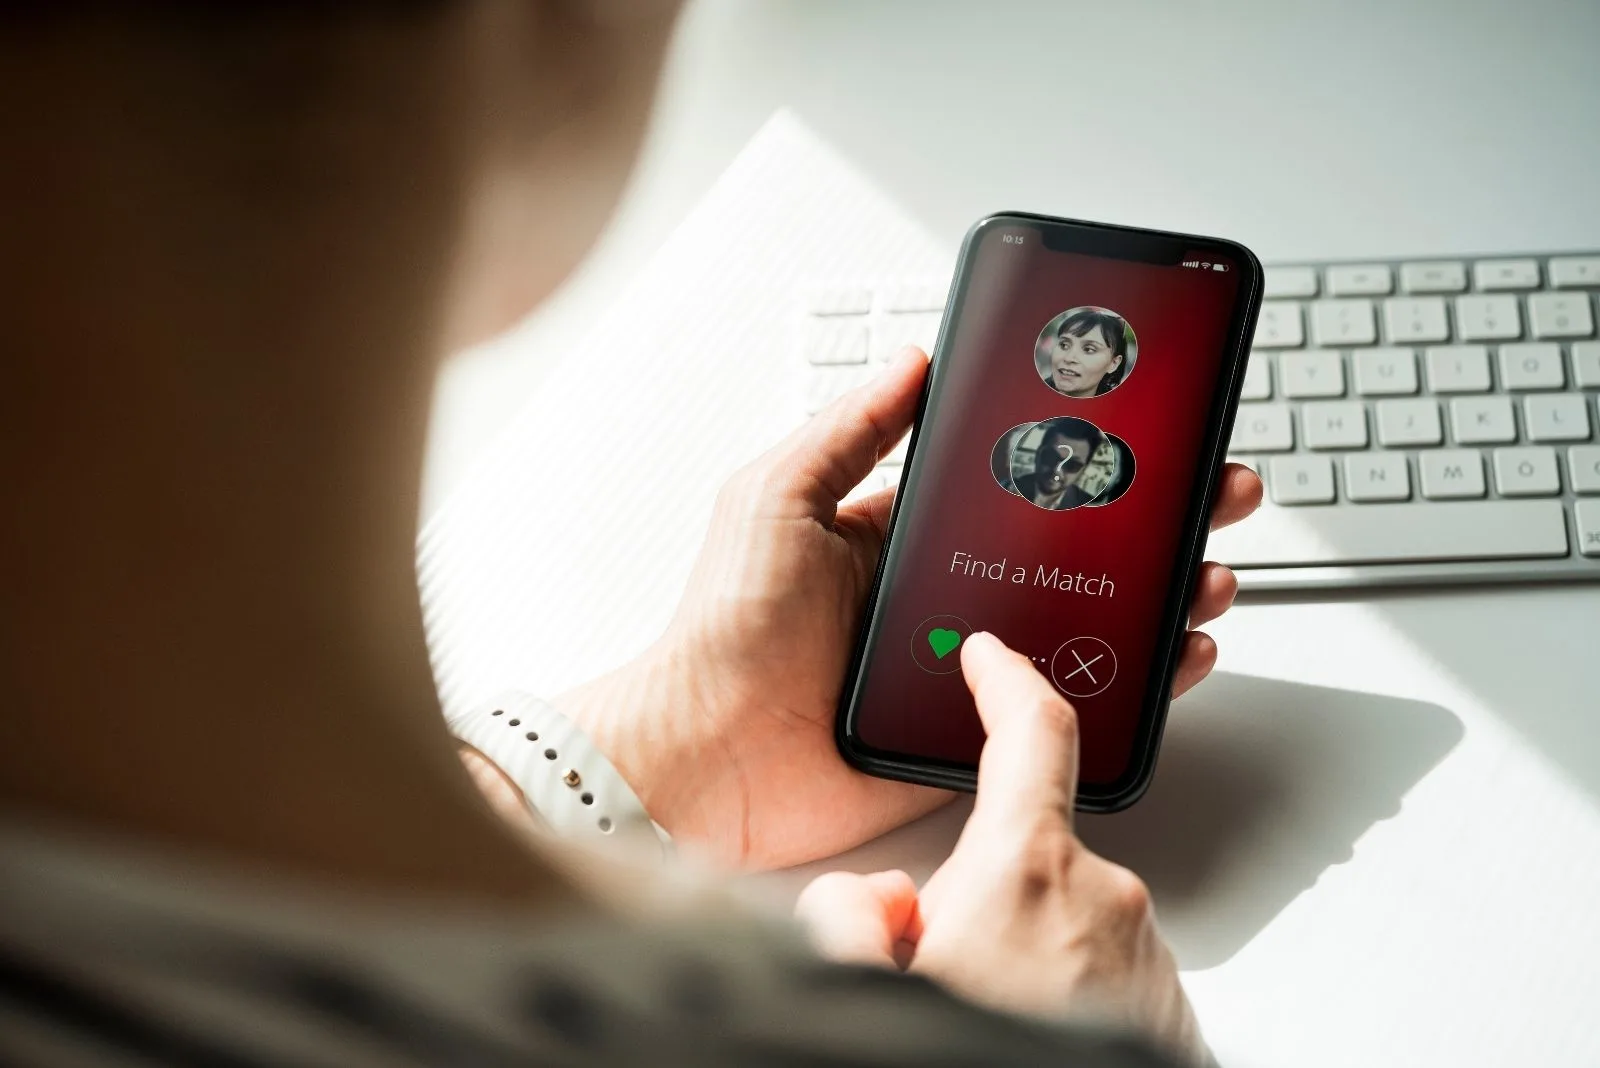 online dating application on the smarphone of the woman 